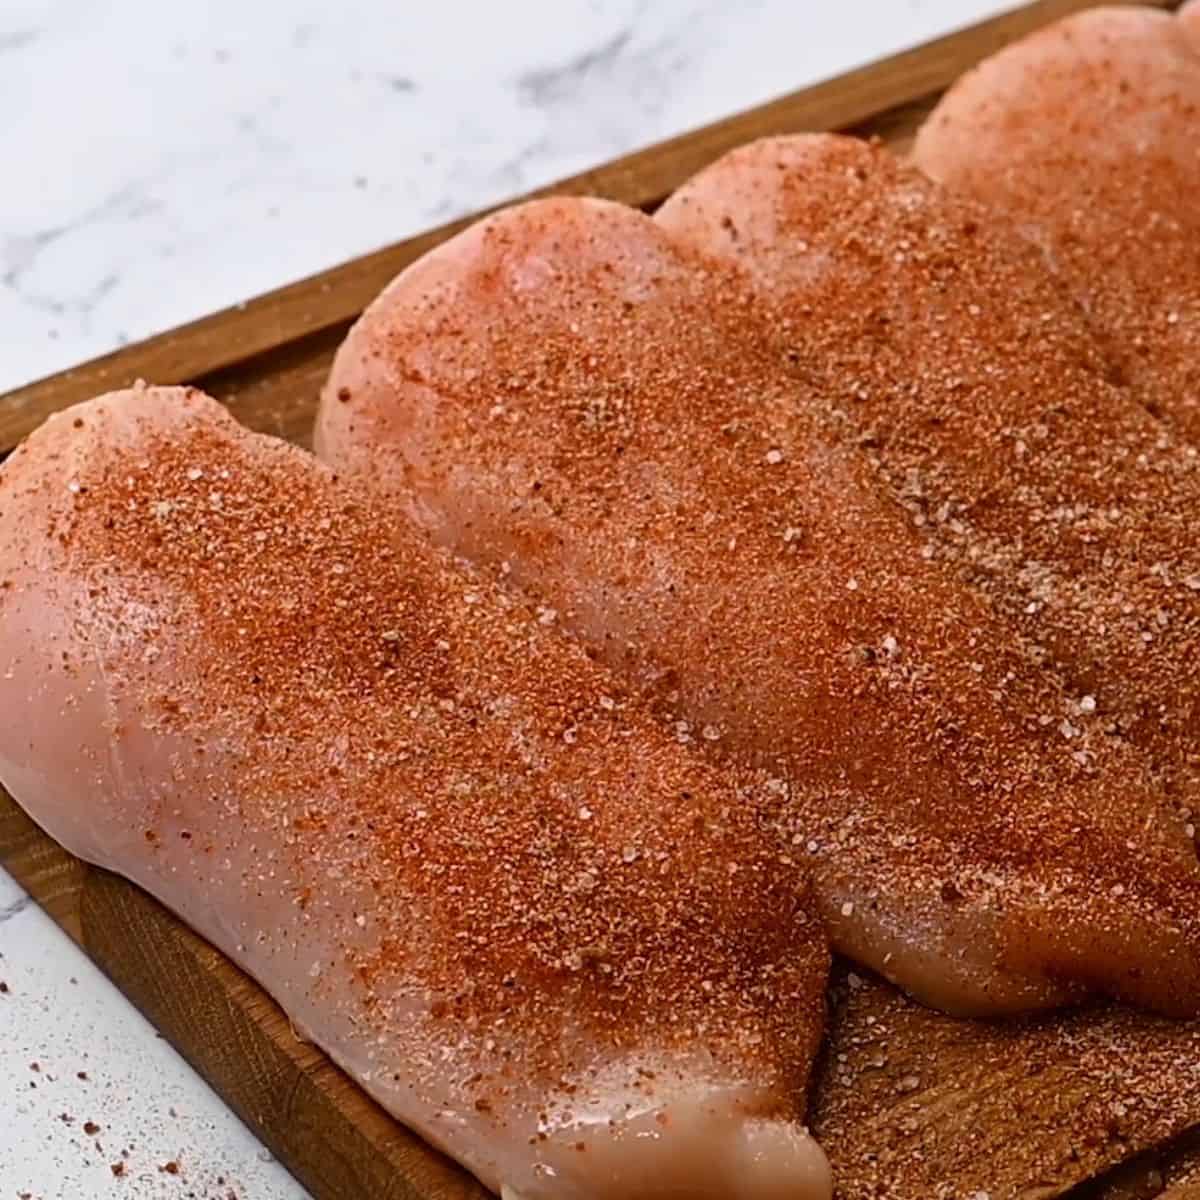 Raw chicken breasts with dry rub over chicken.